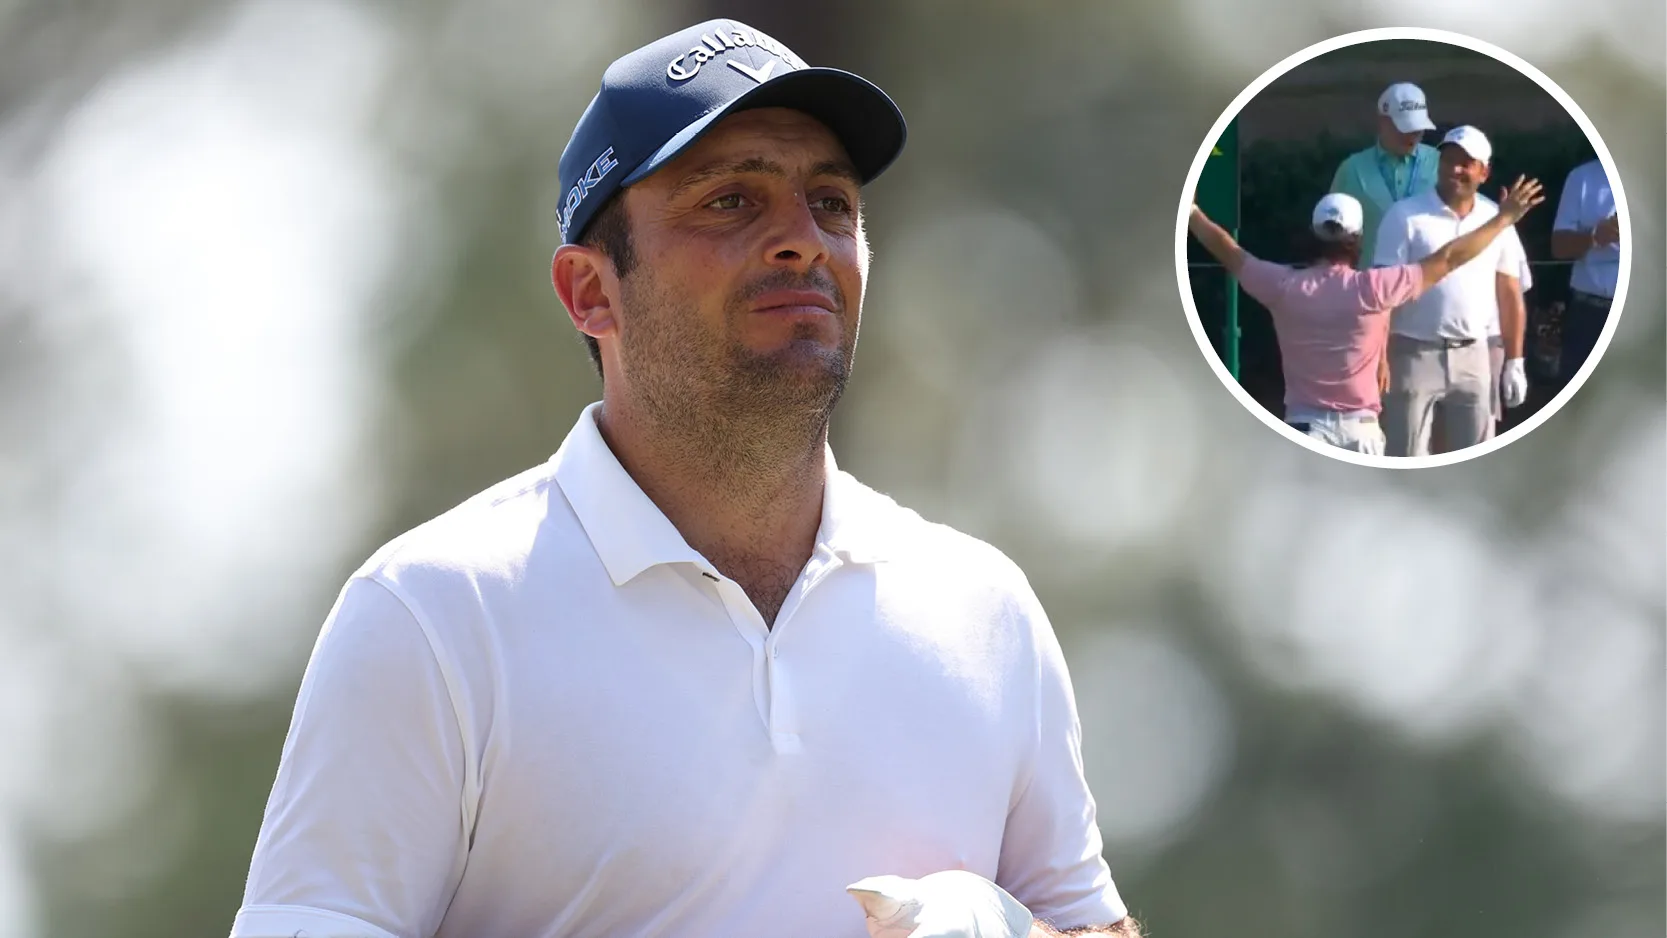 Francesco Molinari Makes US Open Cut With Hole-In-One At Final Hole